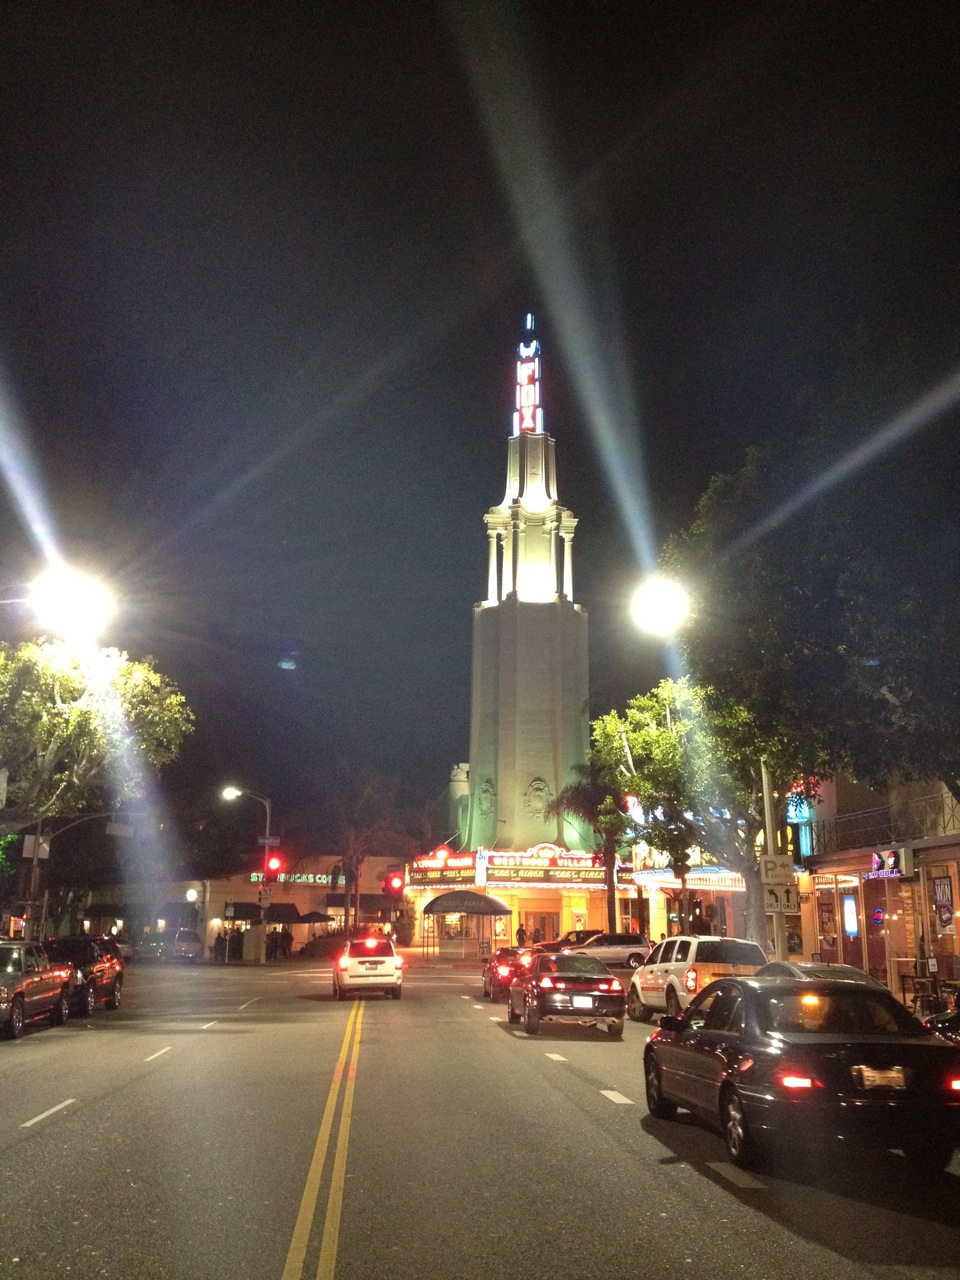 The Fox theater in Westwood Village at night Los Angeles